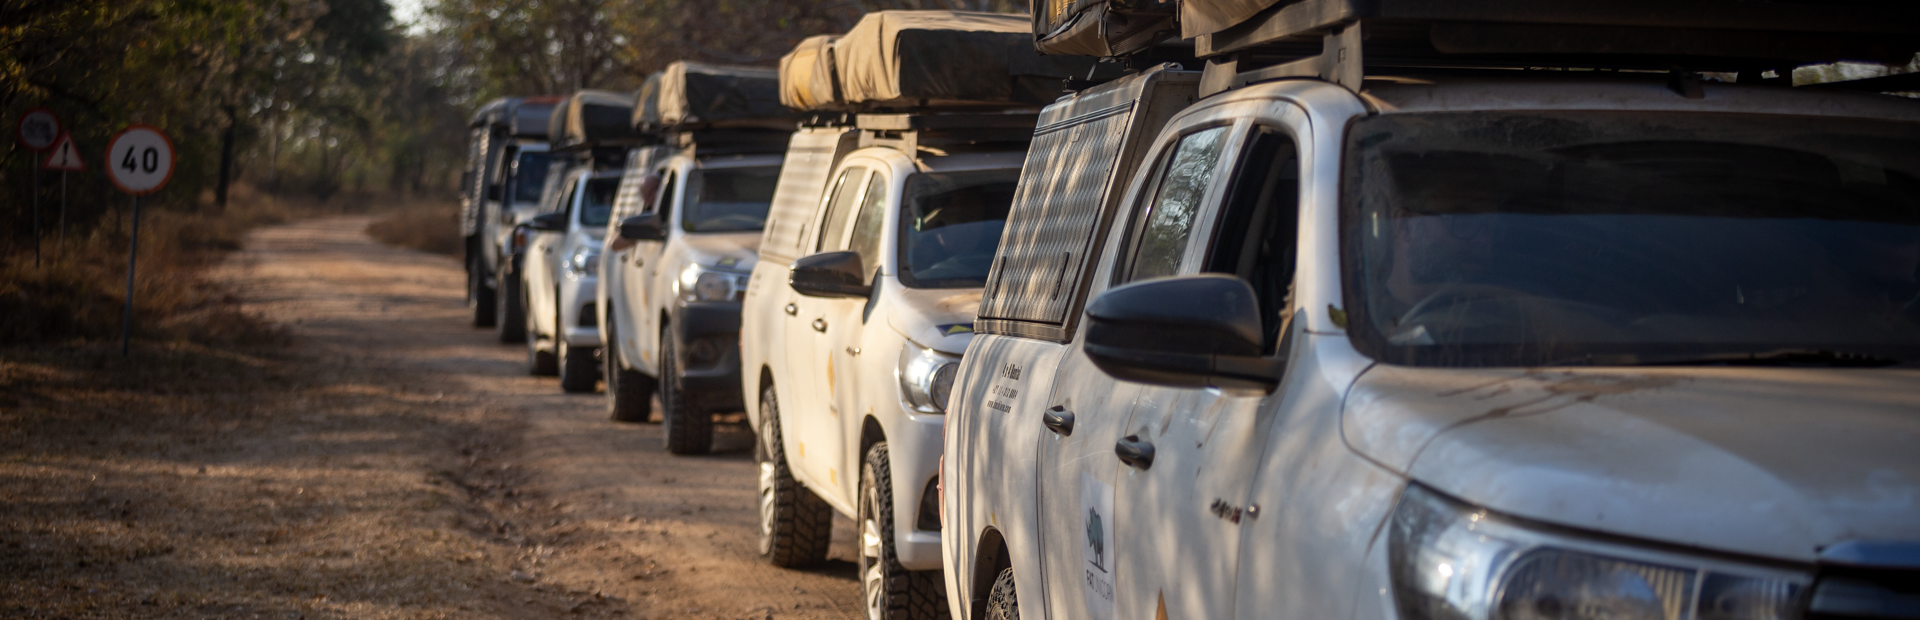 a row of hilux trucks are parked on a dirt road